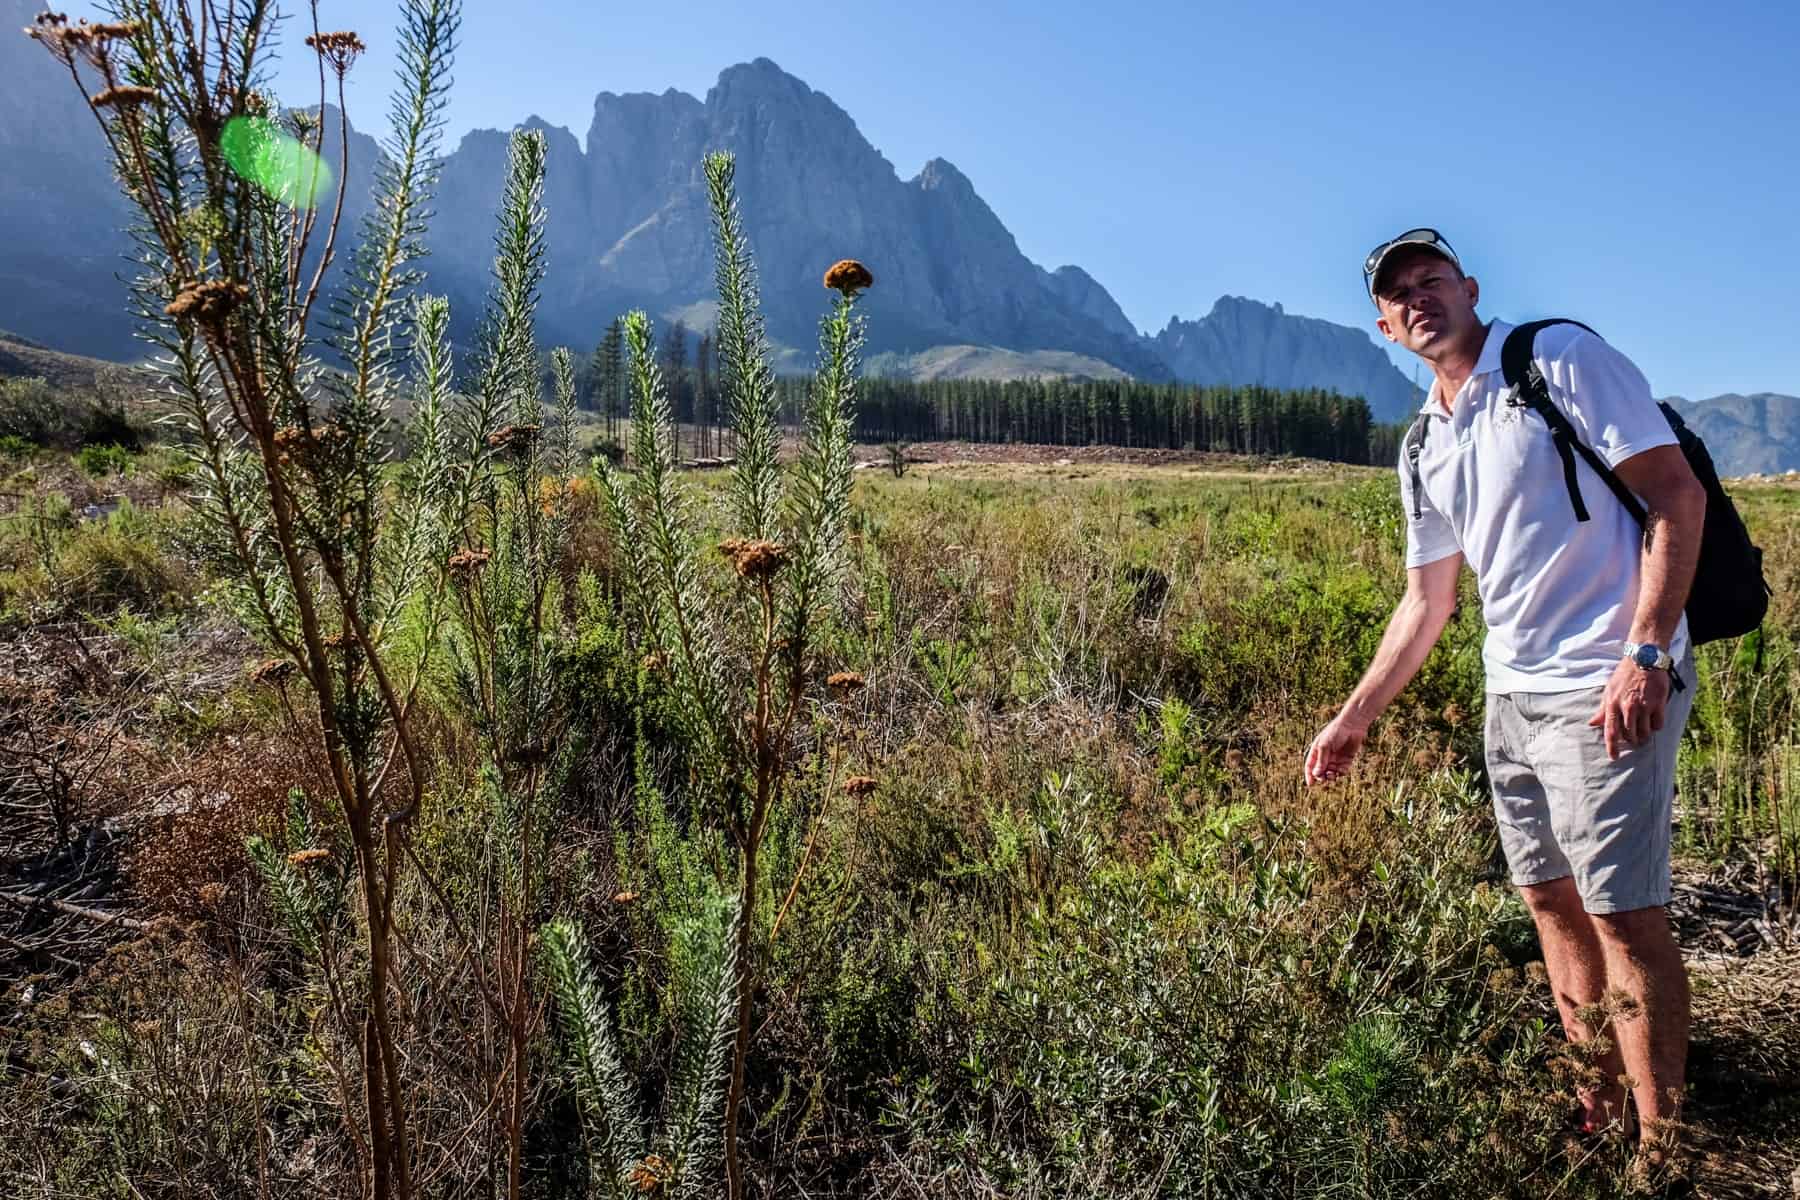 A man dressed in white stands next to a selection of plant shrubs within a wide flat nature park in South Africa that's backed by jagged mountains.